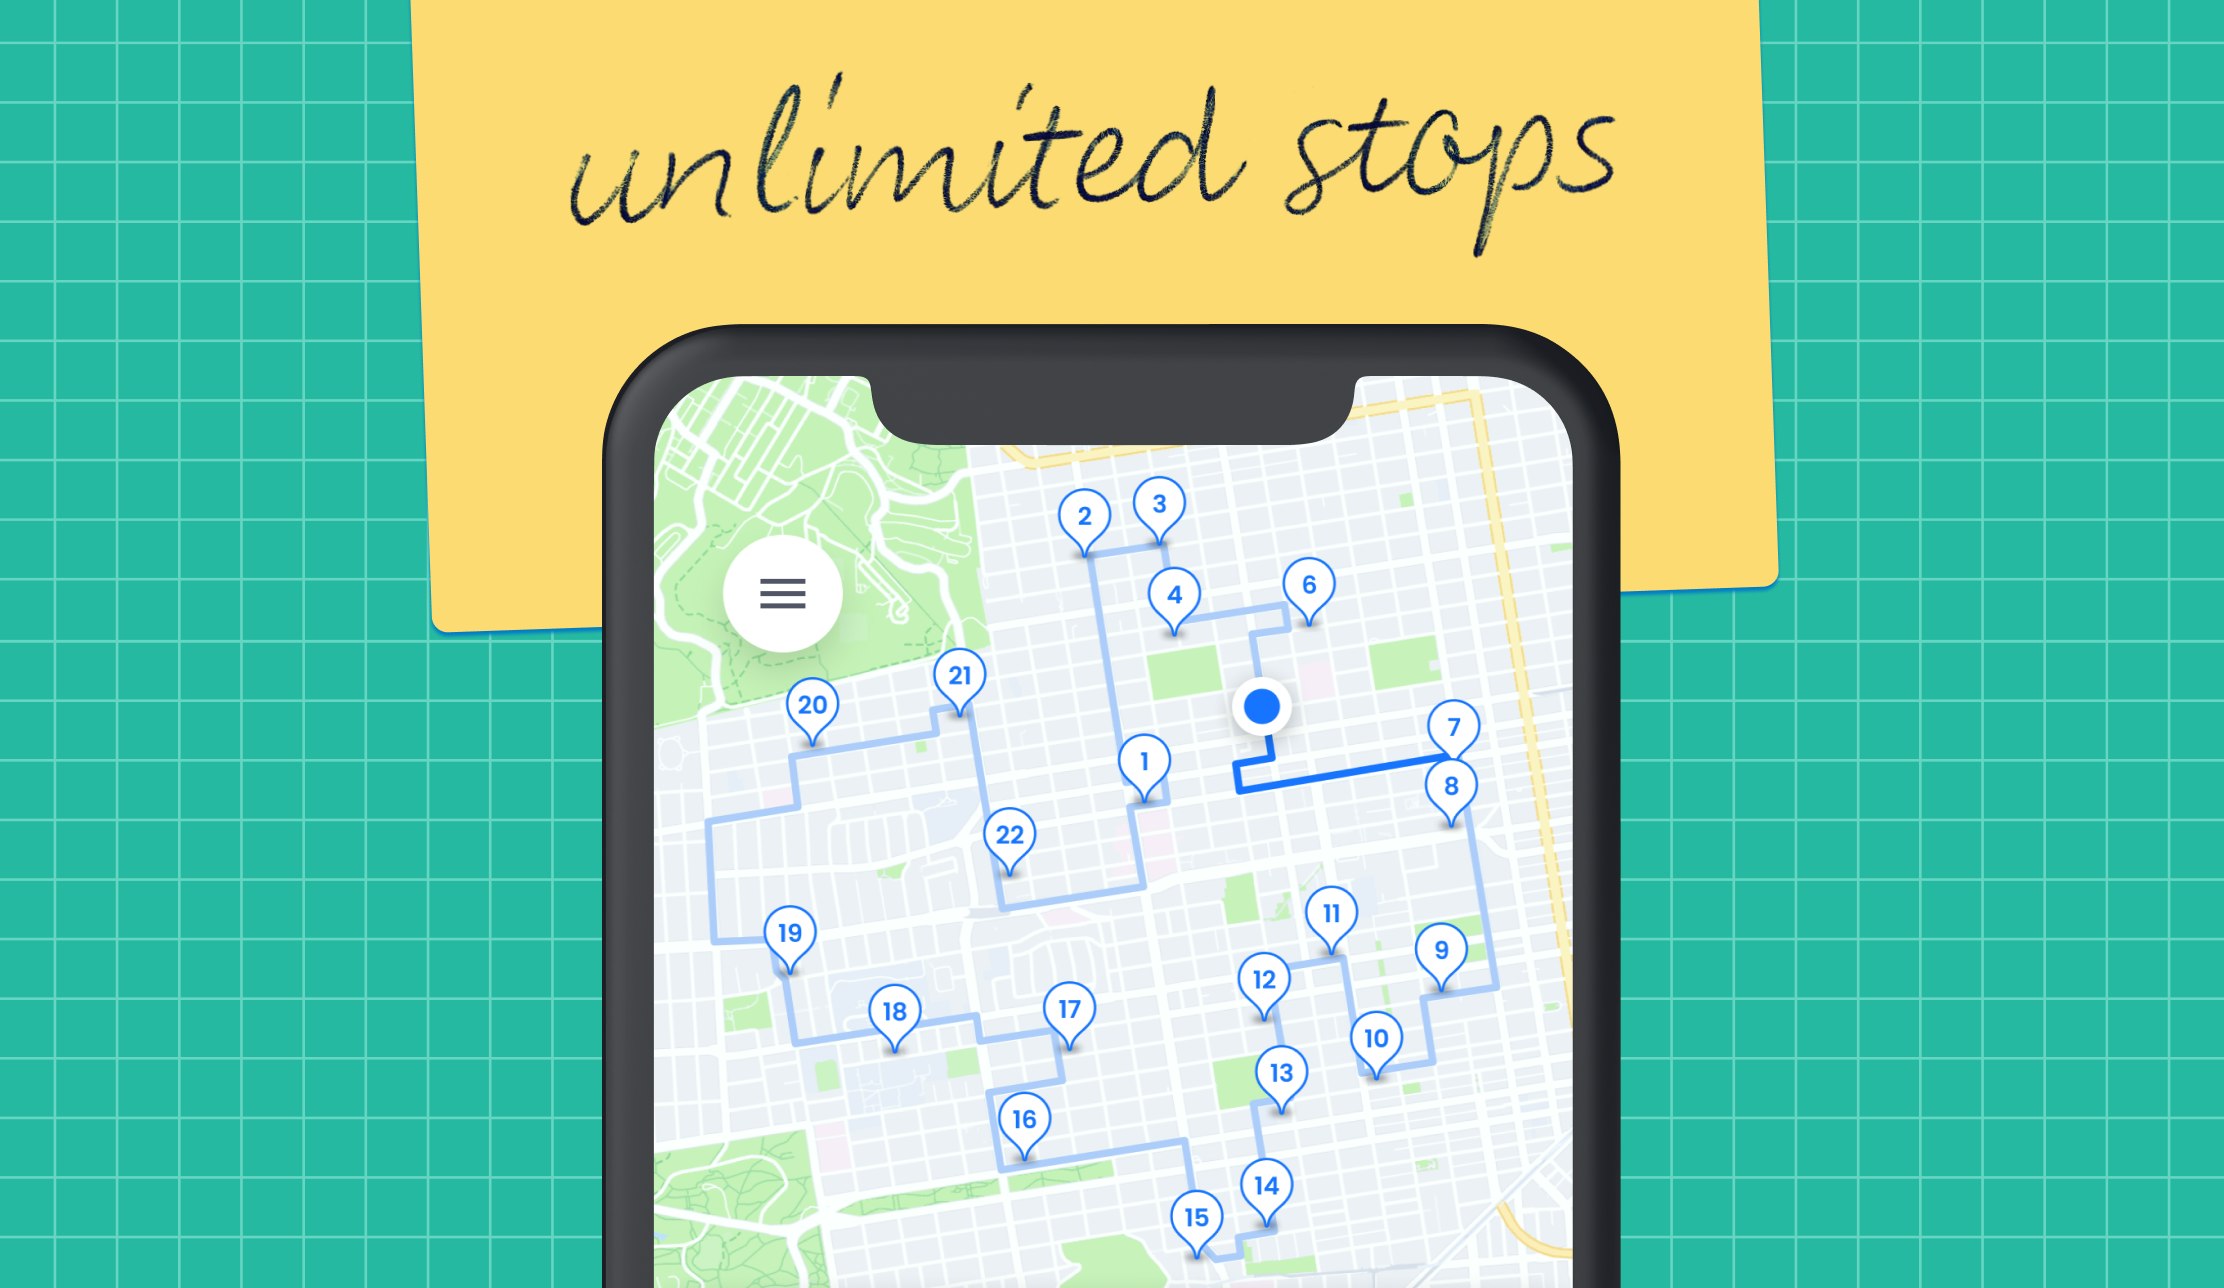 The Best Free Route Planner with Unlimited Stops: Comparing 10 Route Planners